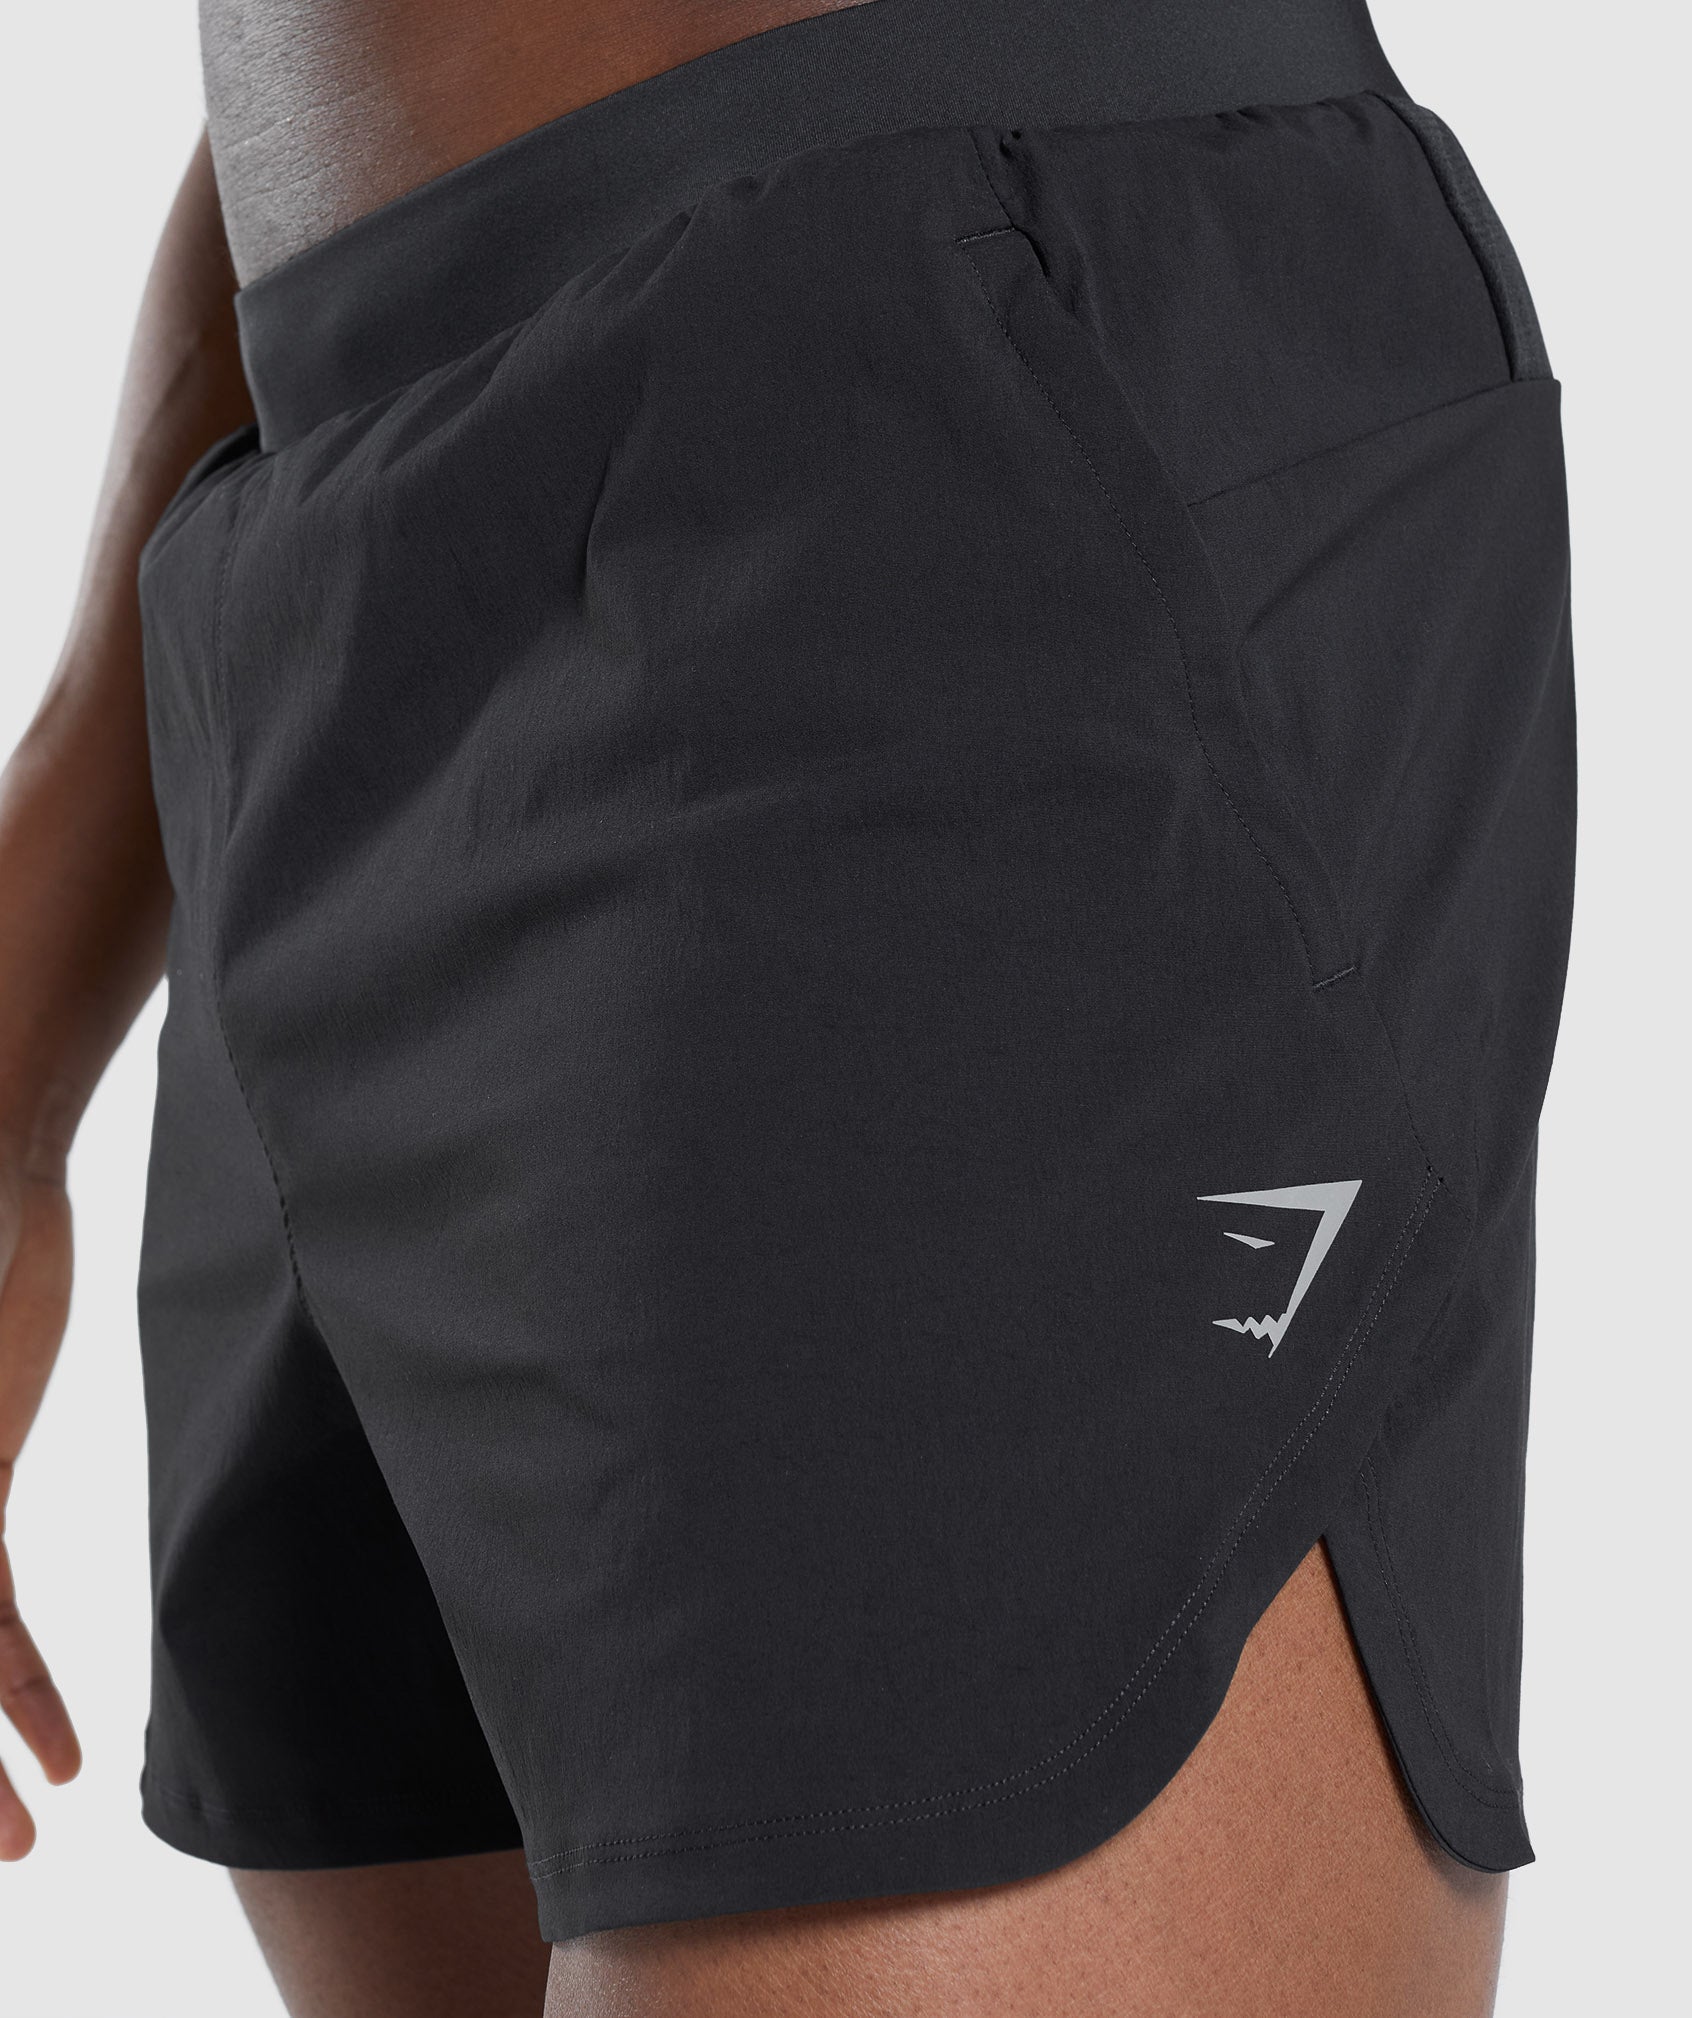 Speed Evolve 5" Shorts in Black - view 6